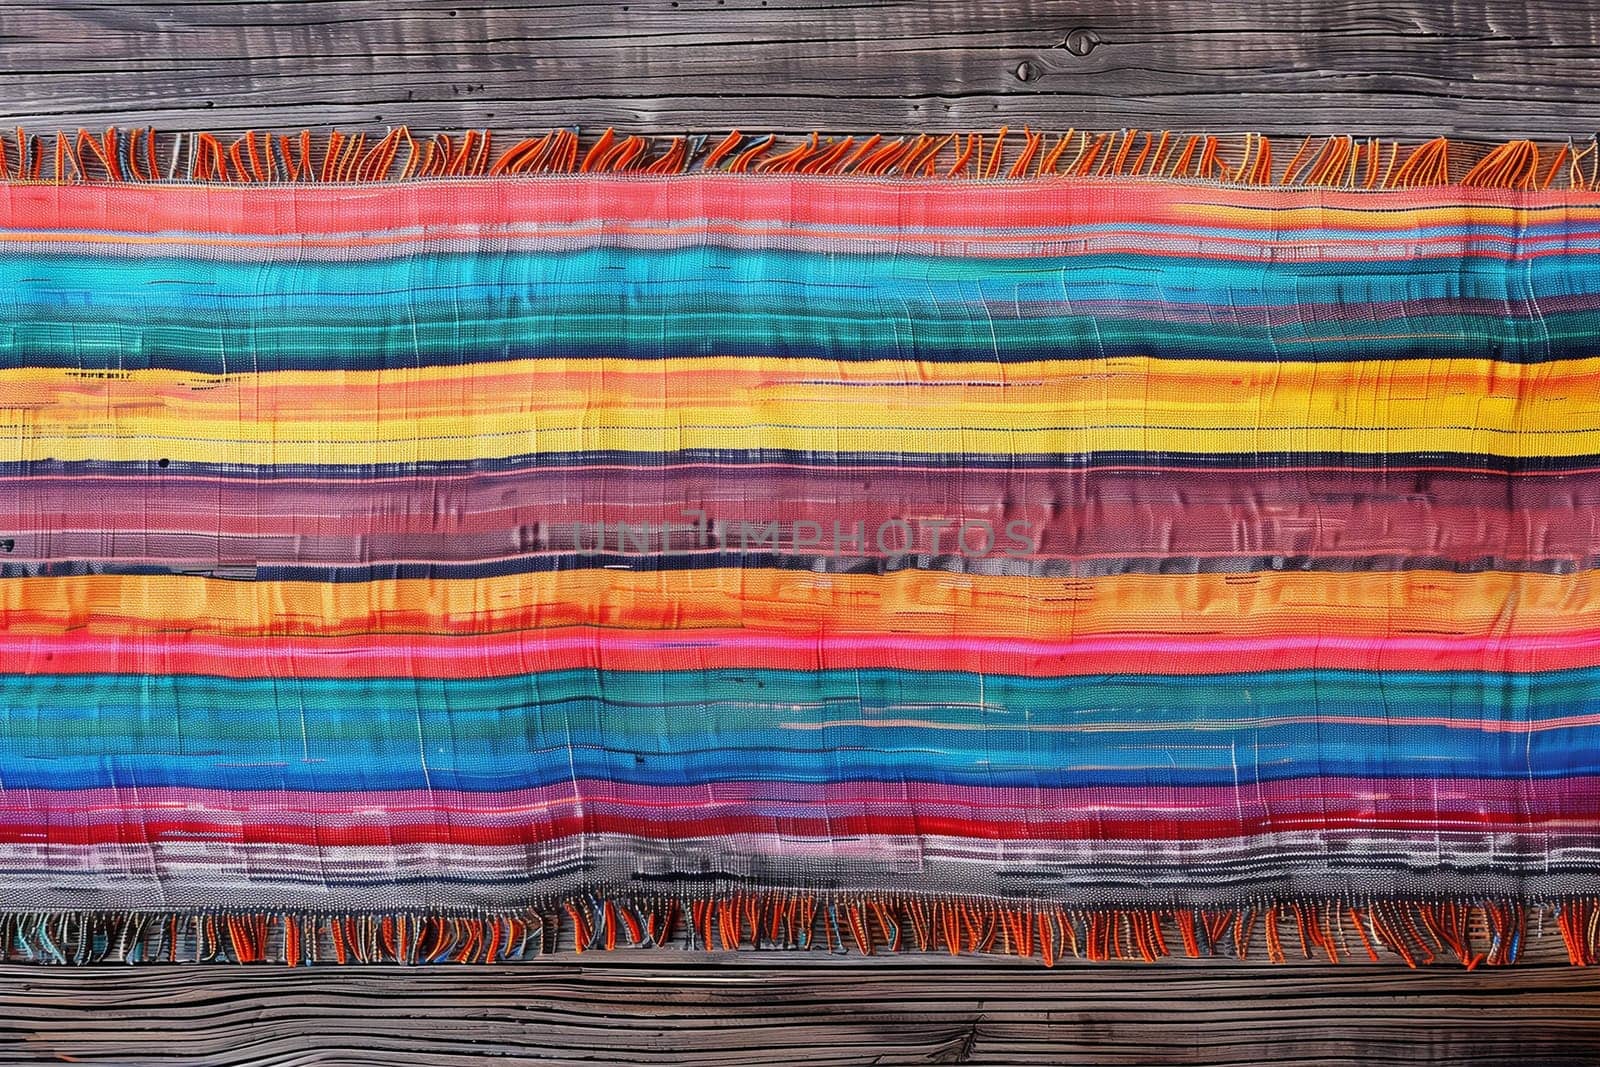 Multicolored Blanket on Wooden Surface by Sd28DimoN_1976